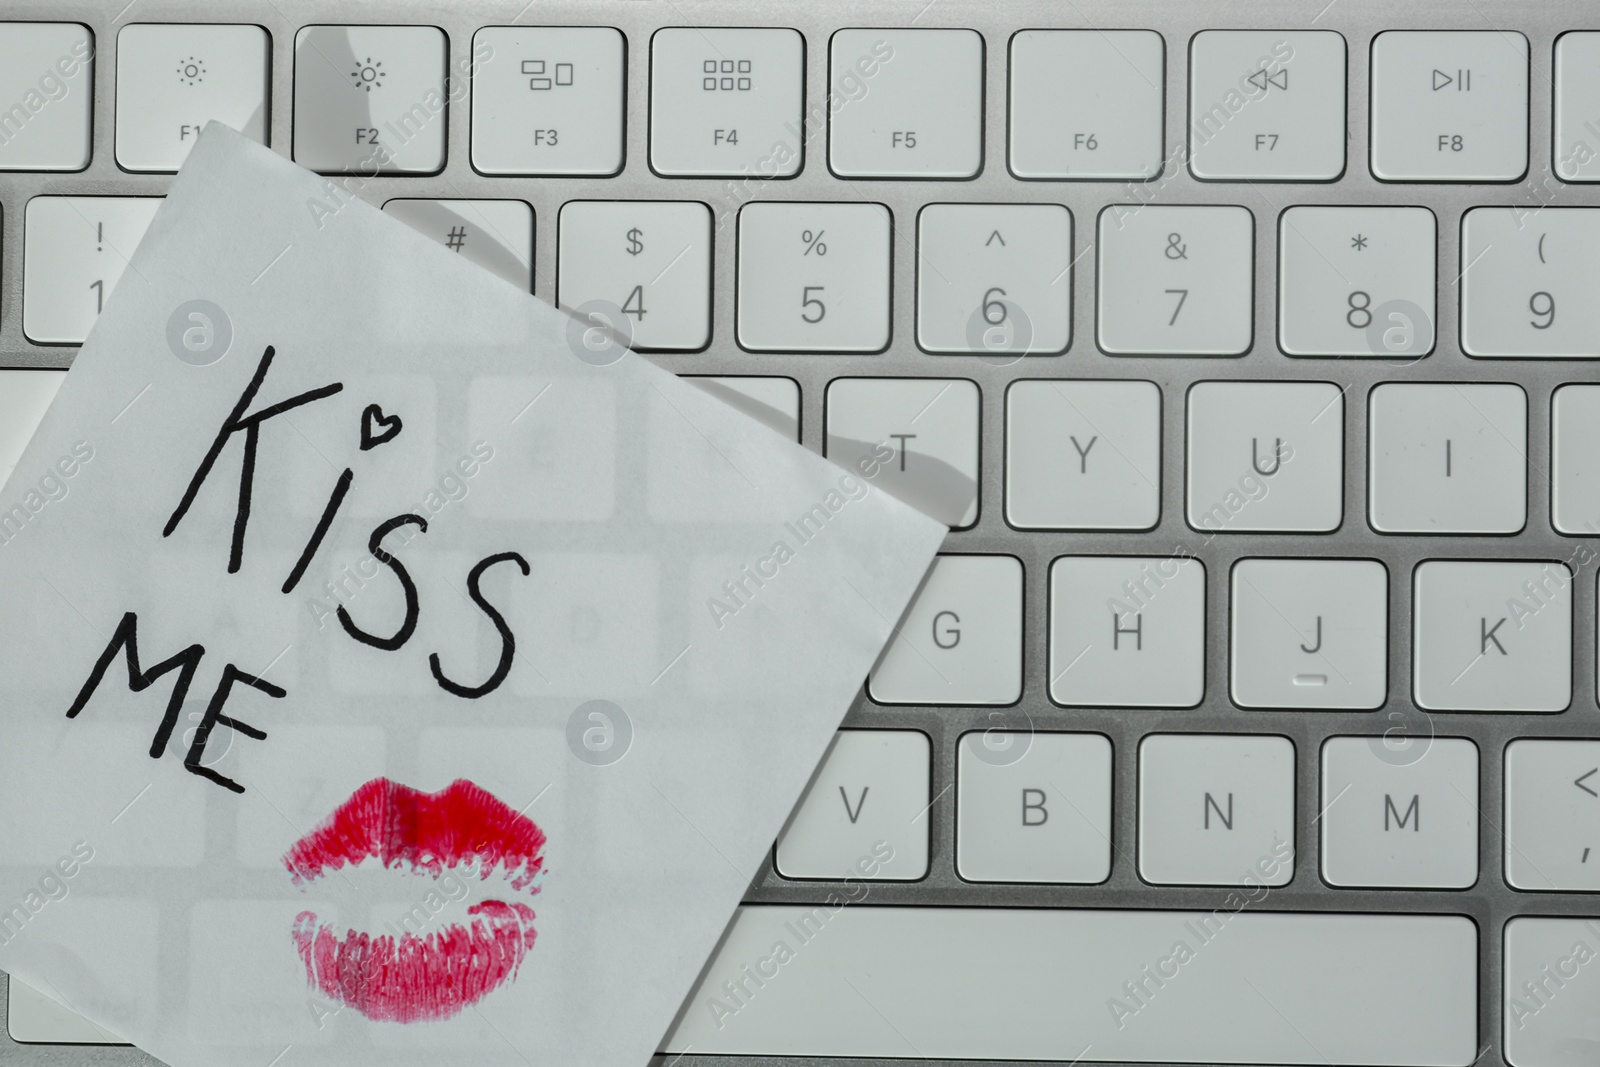 Photo of Sticky note with phrase Kiss Me and lipstick mark on keyboard, top view